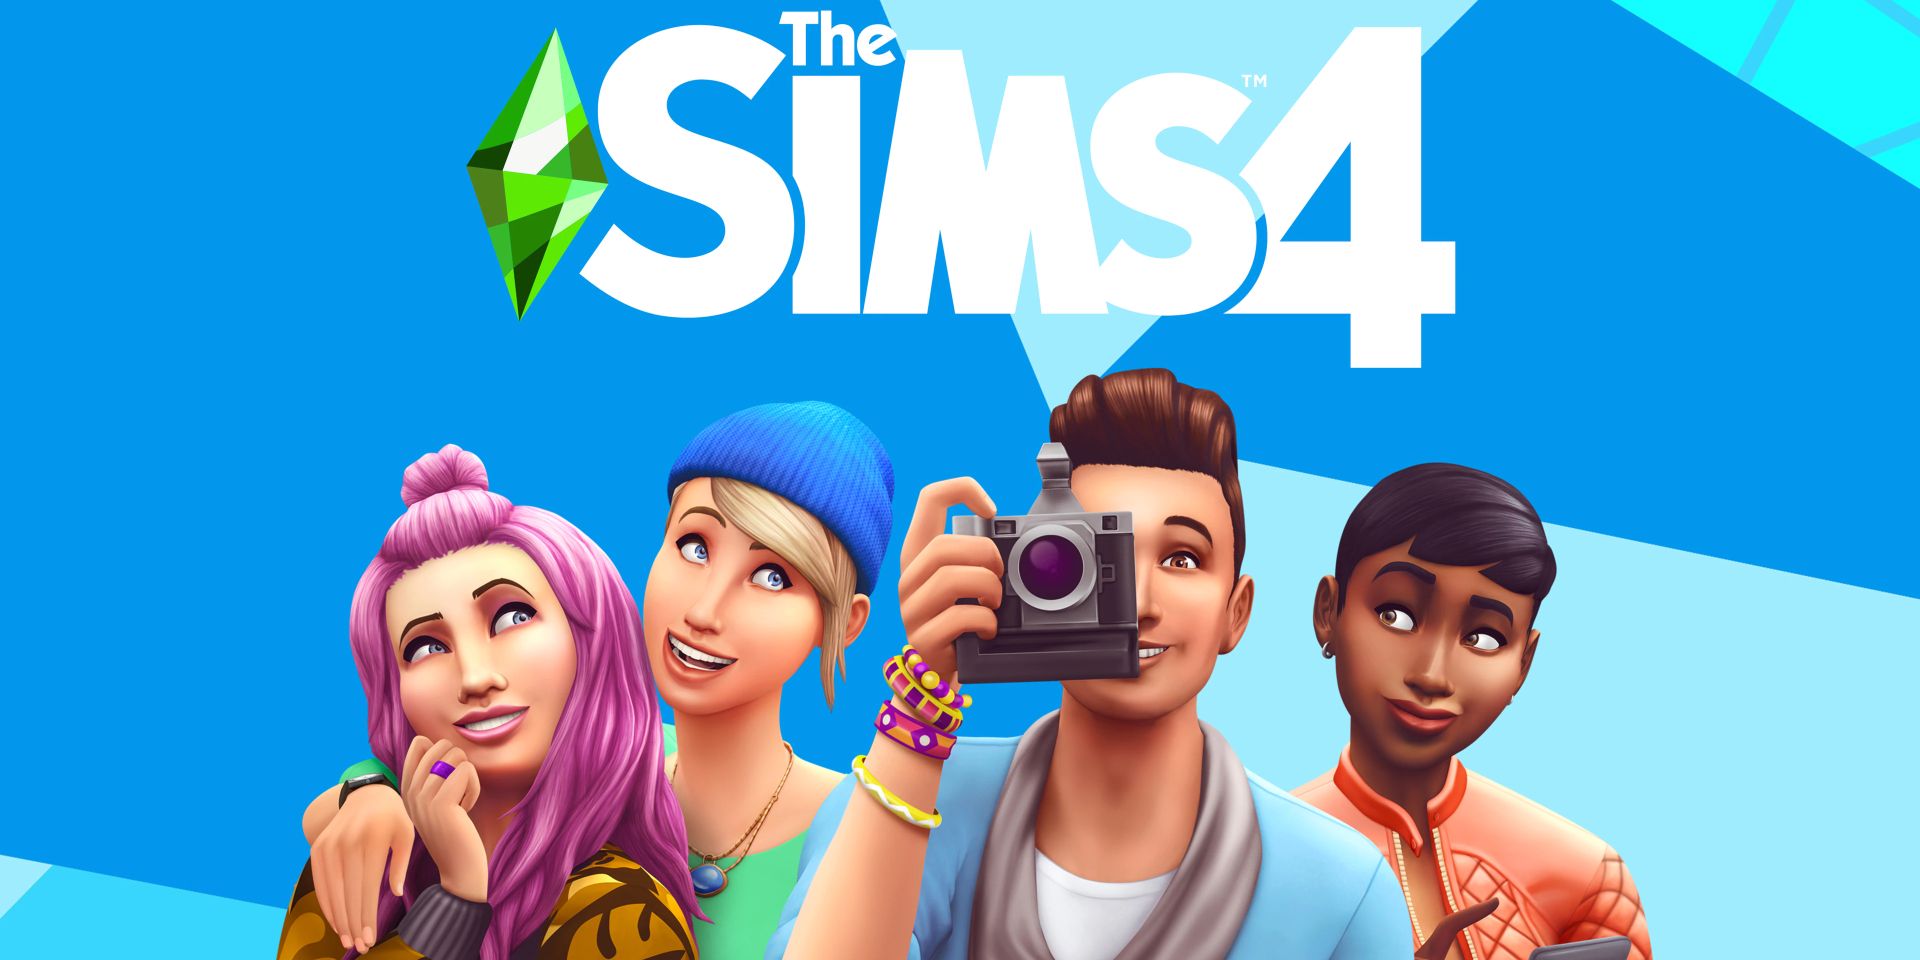 The Sims 4 promo image with Sim holding camera.